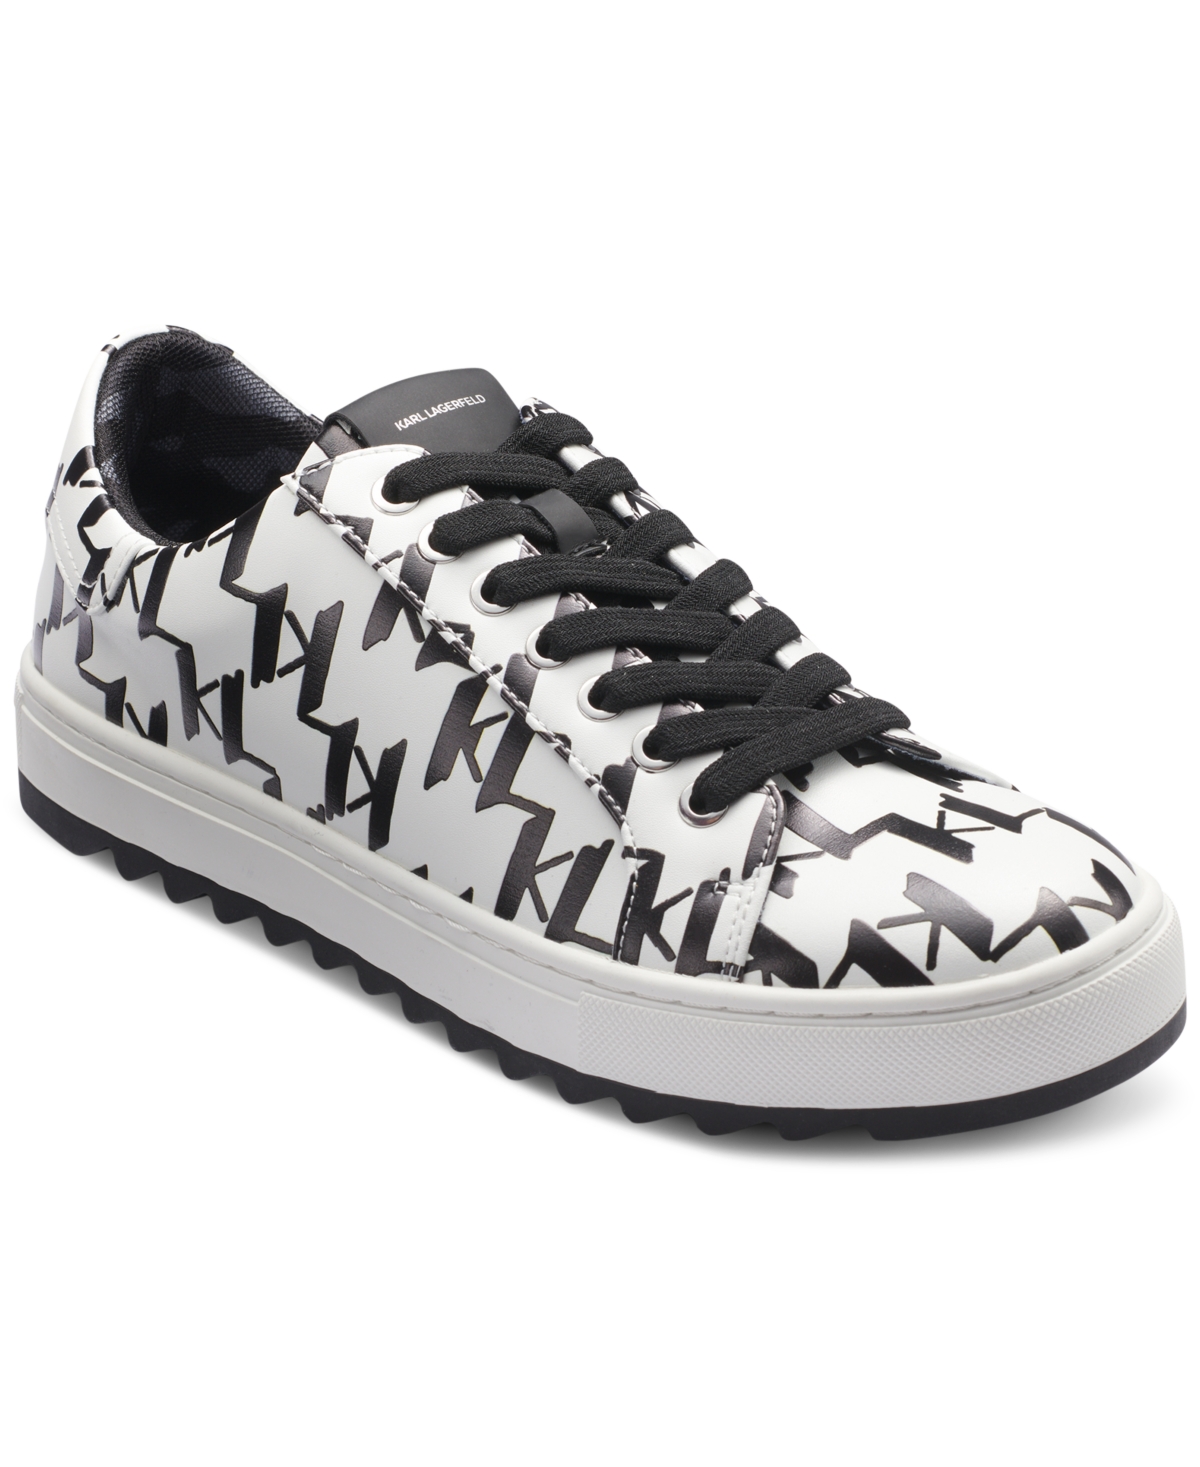 Karl Lagerfeld Men's Allover Logo Lace Up Low Top Sneaker - White